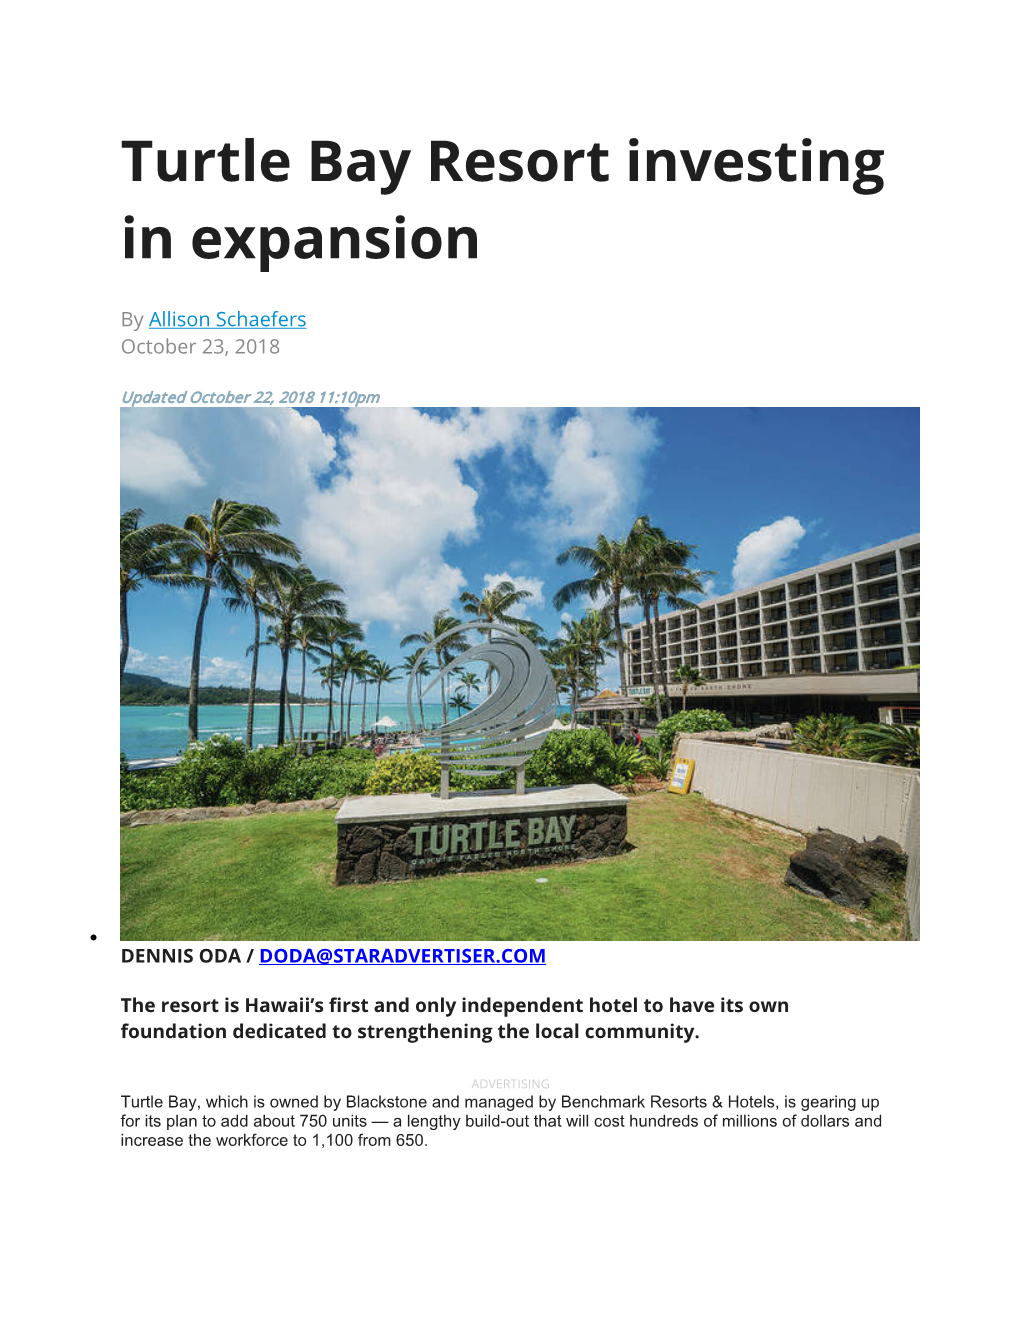 Turtle Bay Resort Investing in Expansion